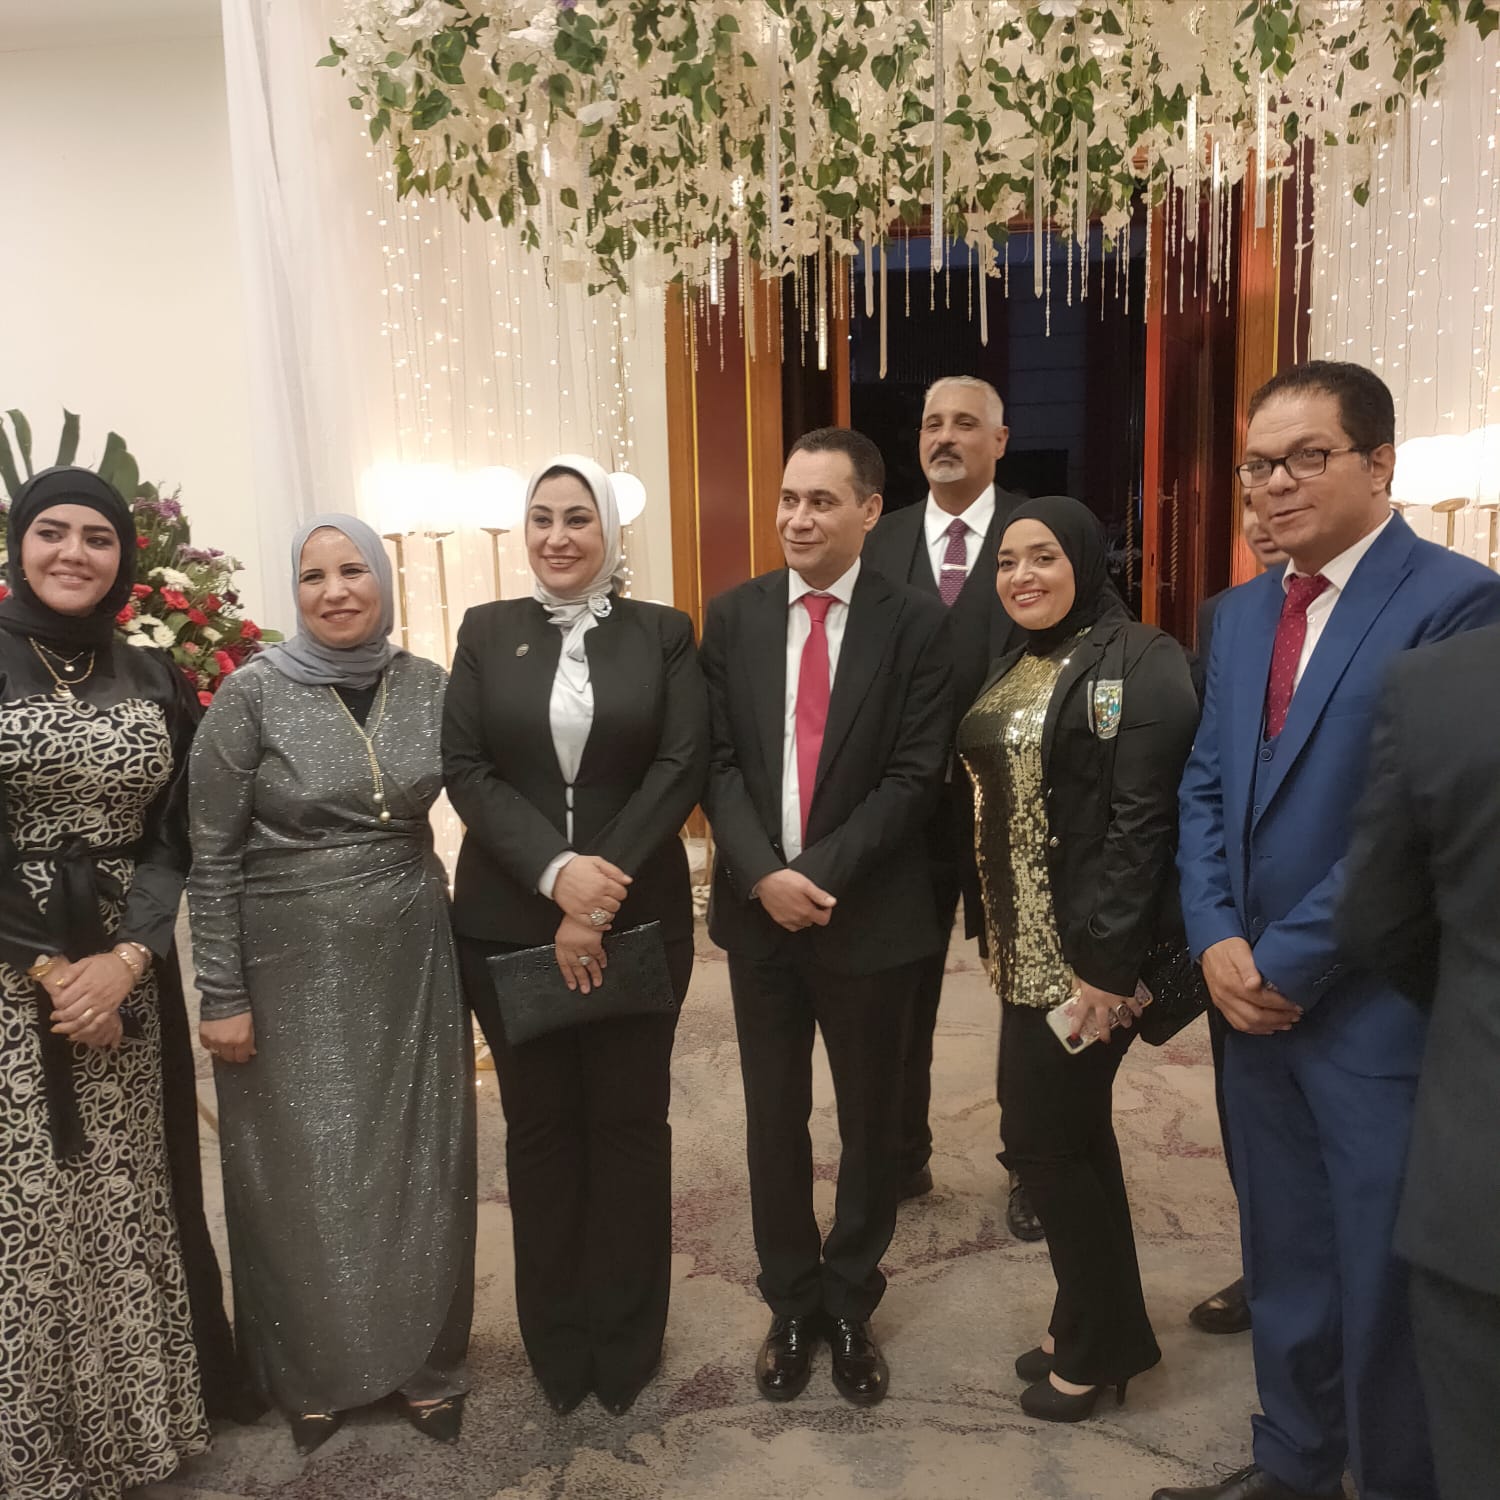 MP Ahmed Ashour celebrates his daughter's wedding (2)